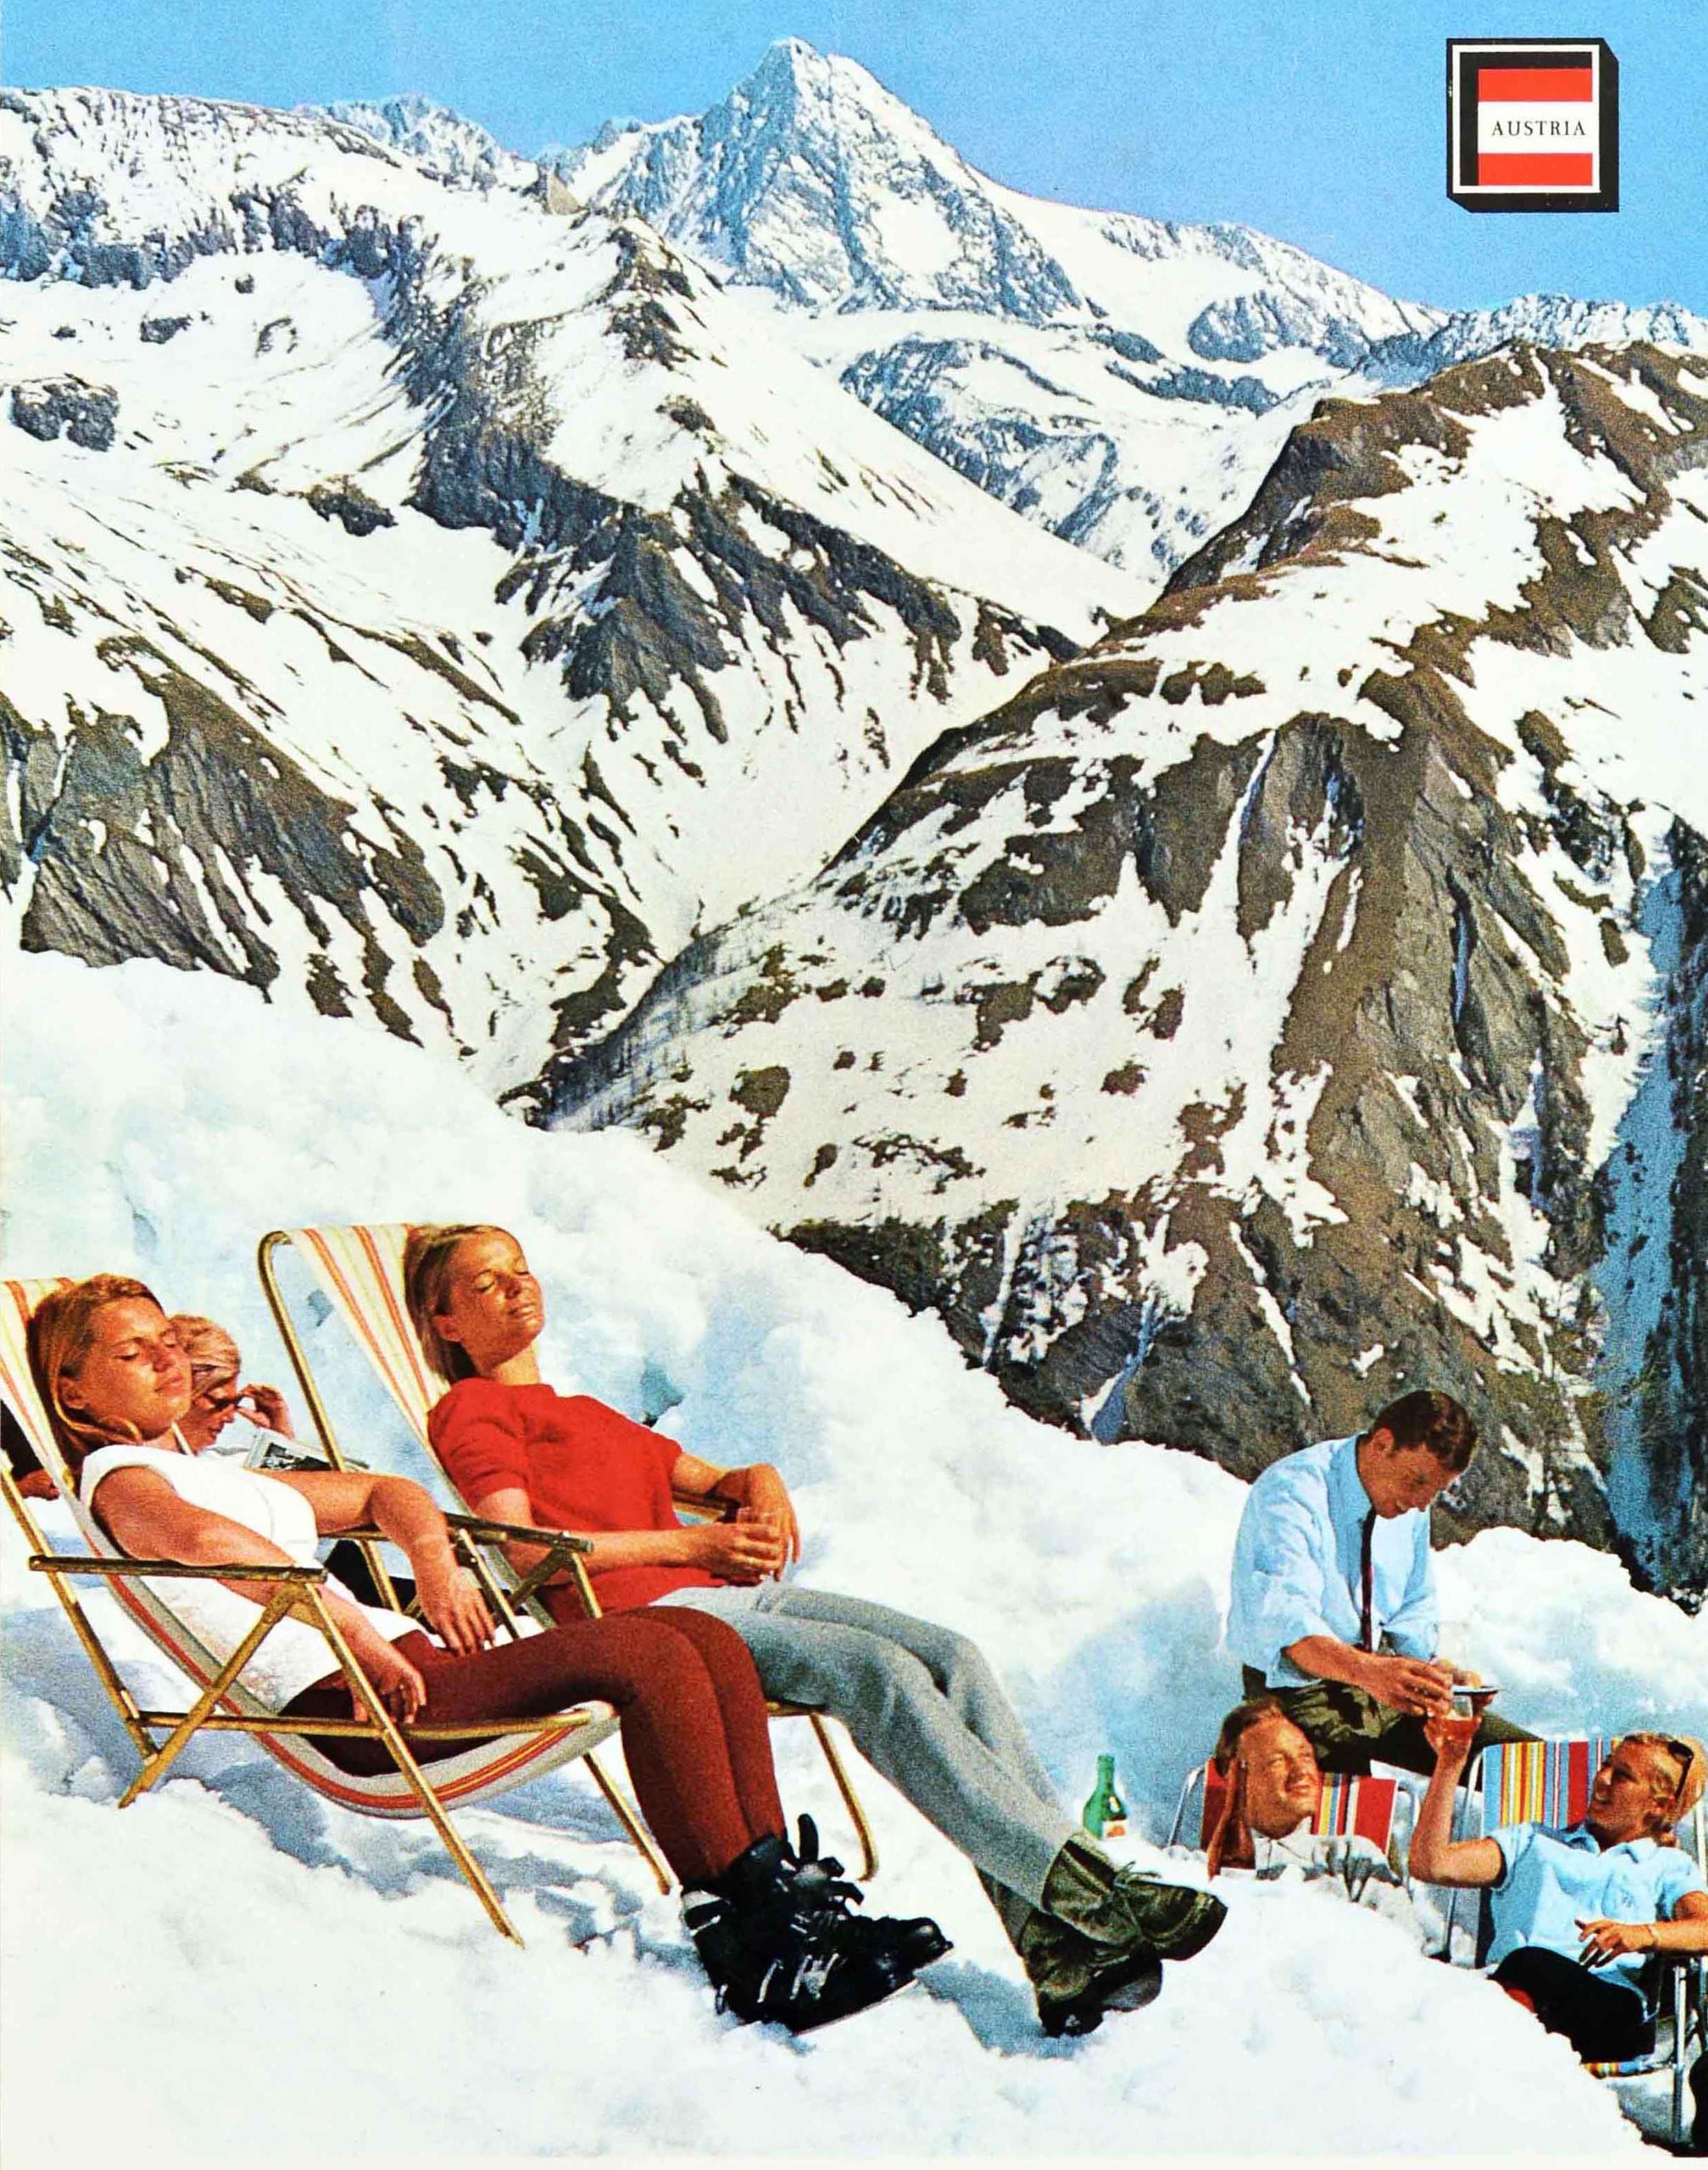 Original Vintage Winter Travel Poster Osterreich Austria Skiing Sunbathing Photo In Good Condition For Sale In London, GB